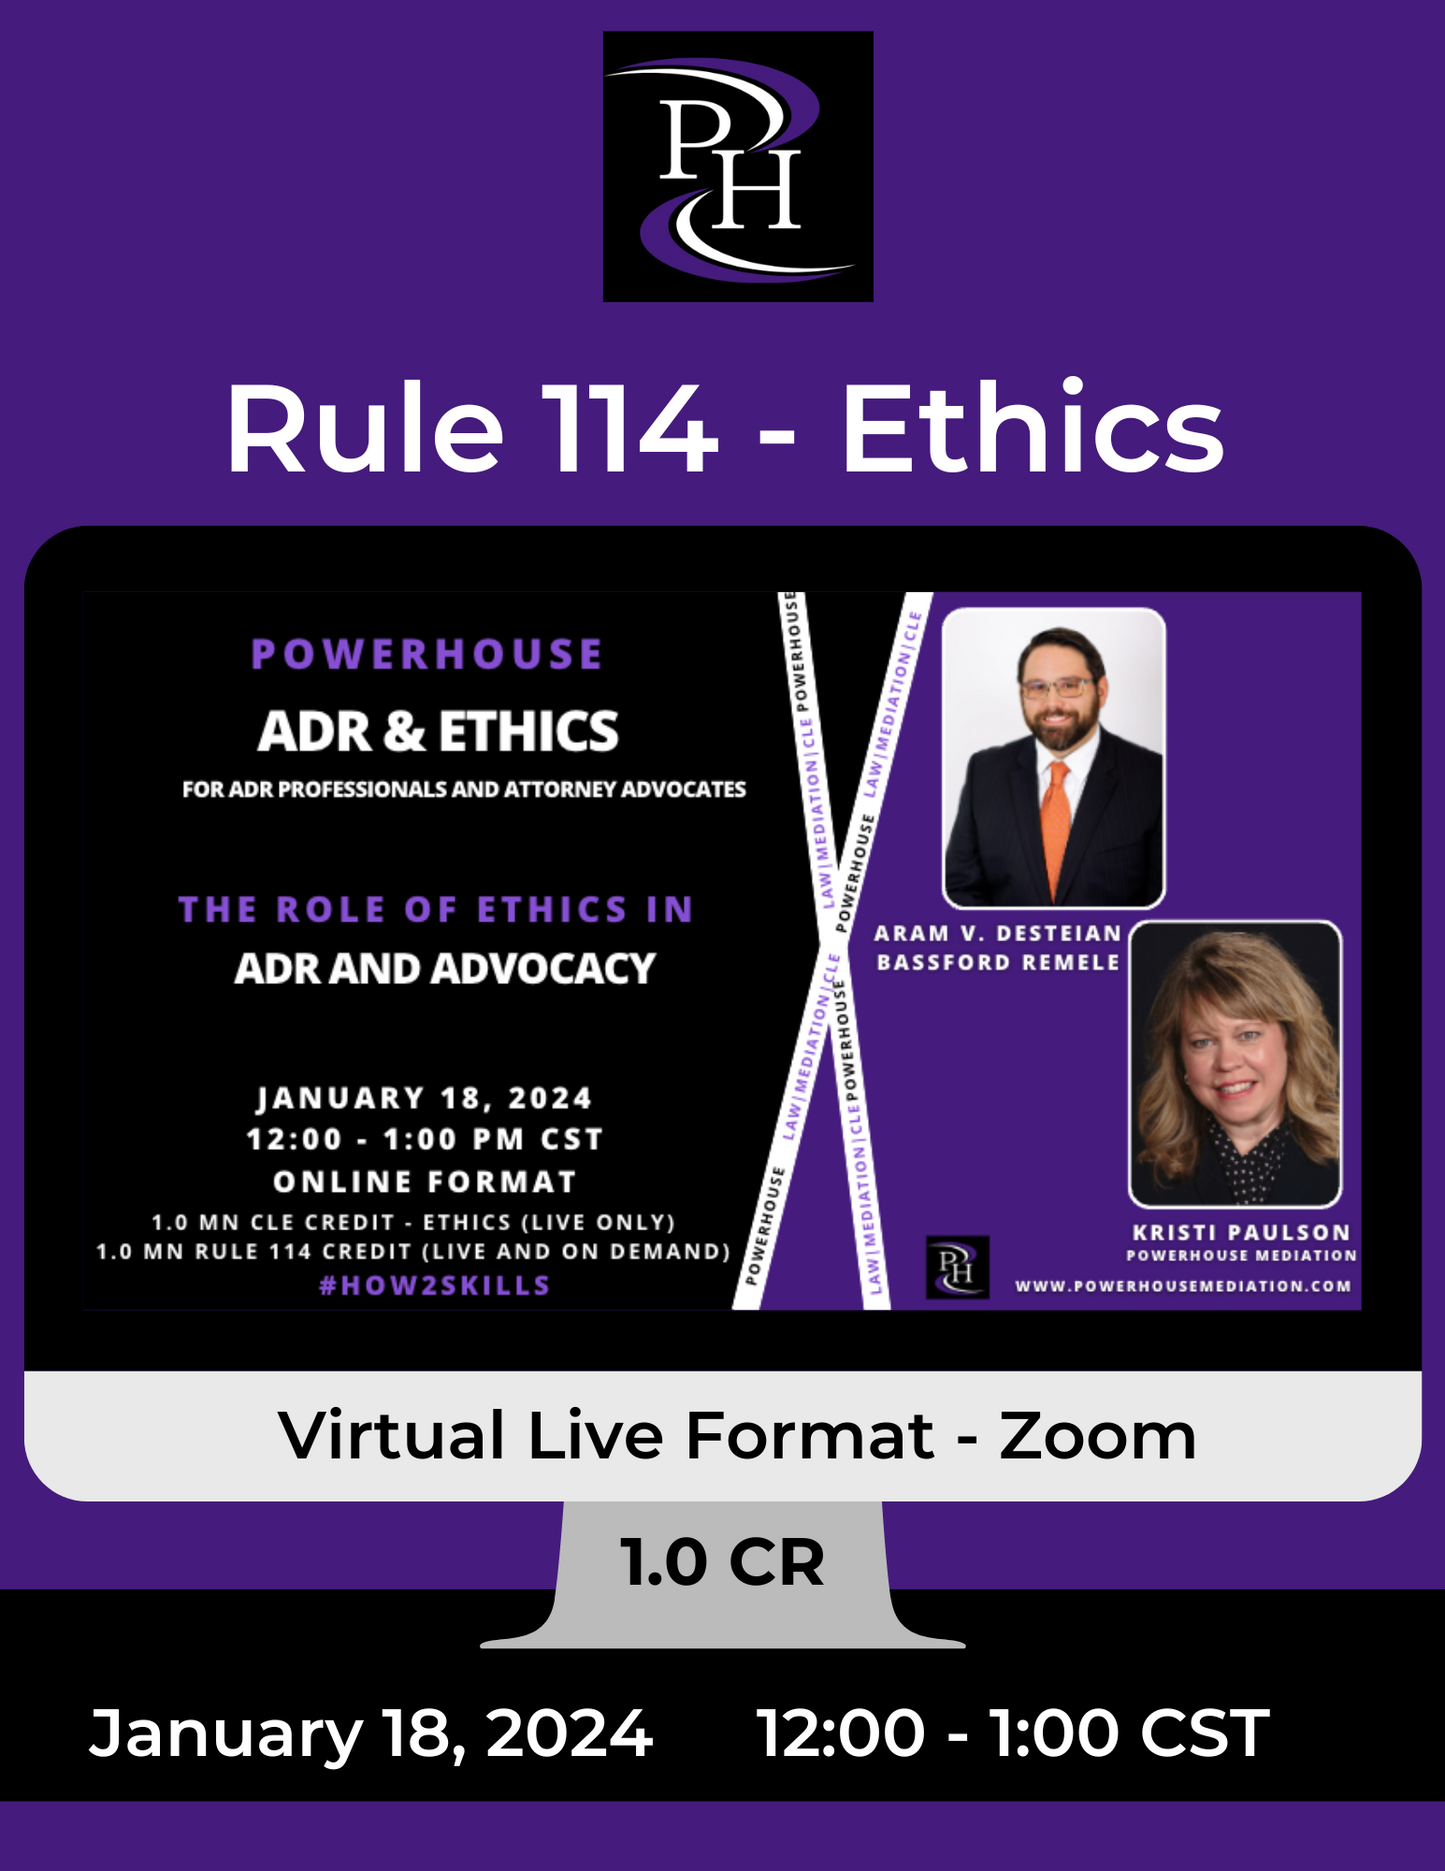 The Role of Ethics in ADR and Advocacy